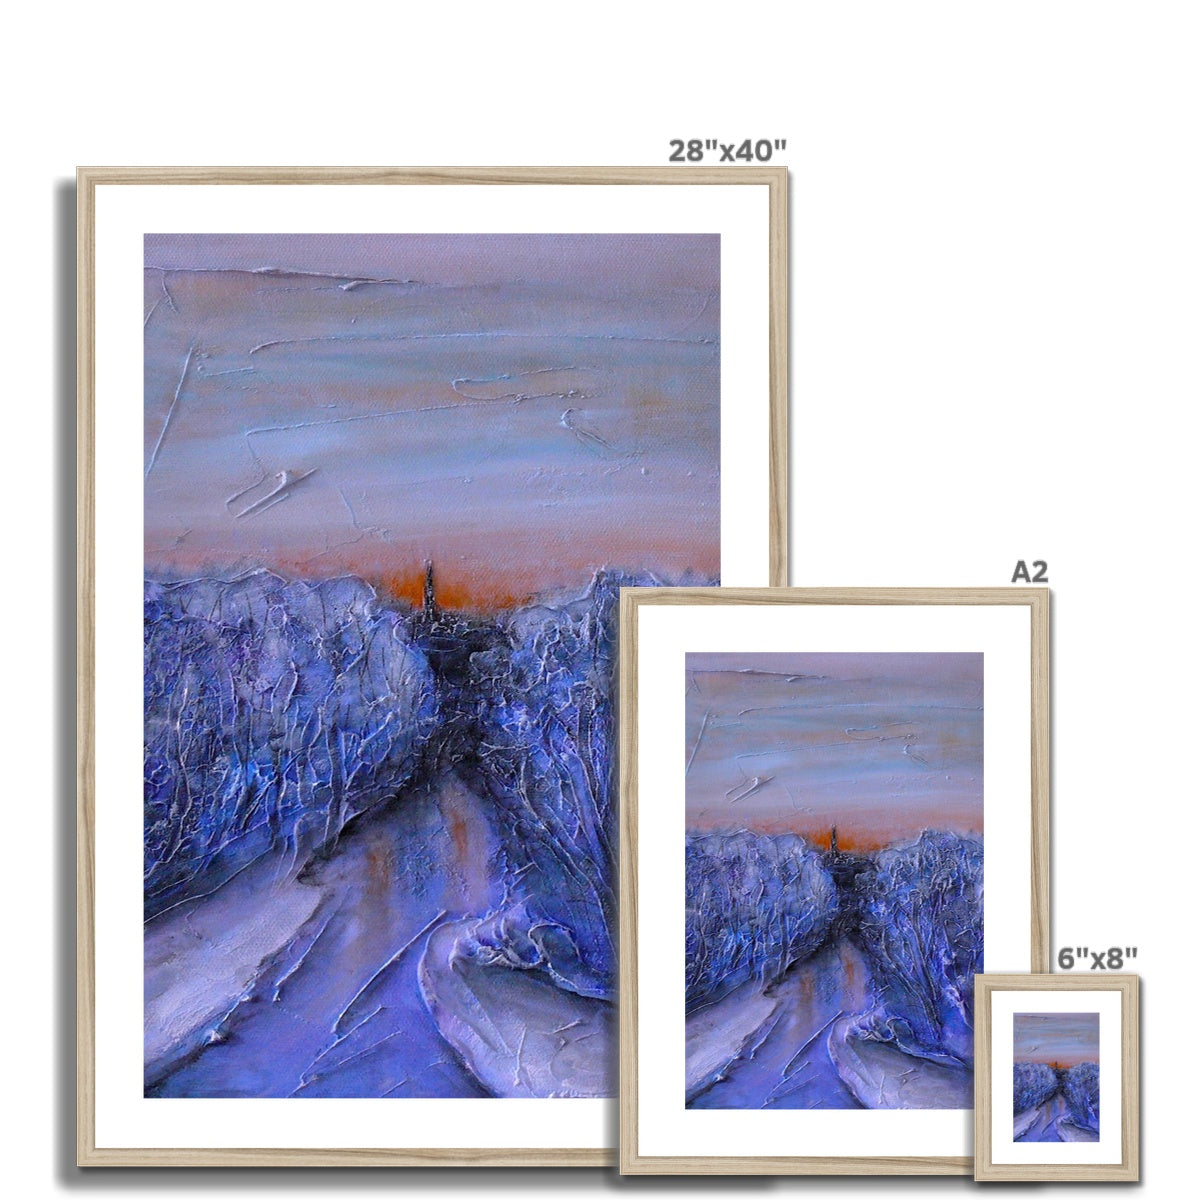 A Frozen River Kelvin Painting | Framed & Mounted Prints From Scotland-Framed & Mounted Prints-Edinburgh & Glasgow Art Gallery-Paintings, Prints, Homeware, Art Gifts From Scotland By Scottish Artist Kevin Hunter